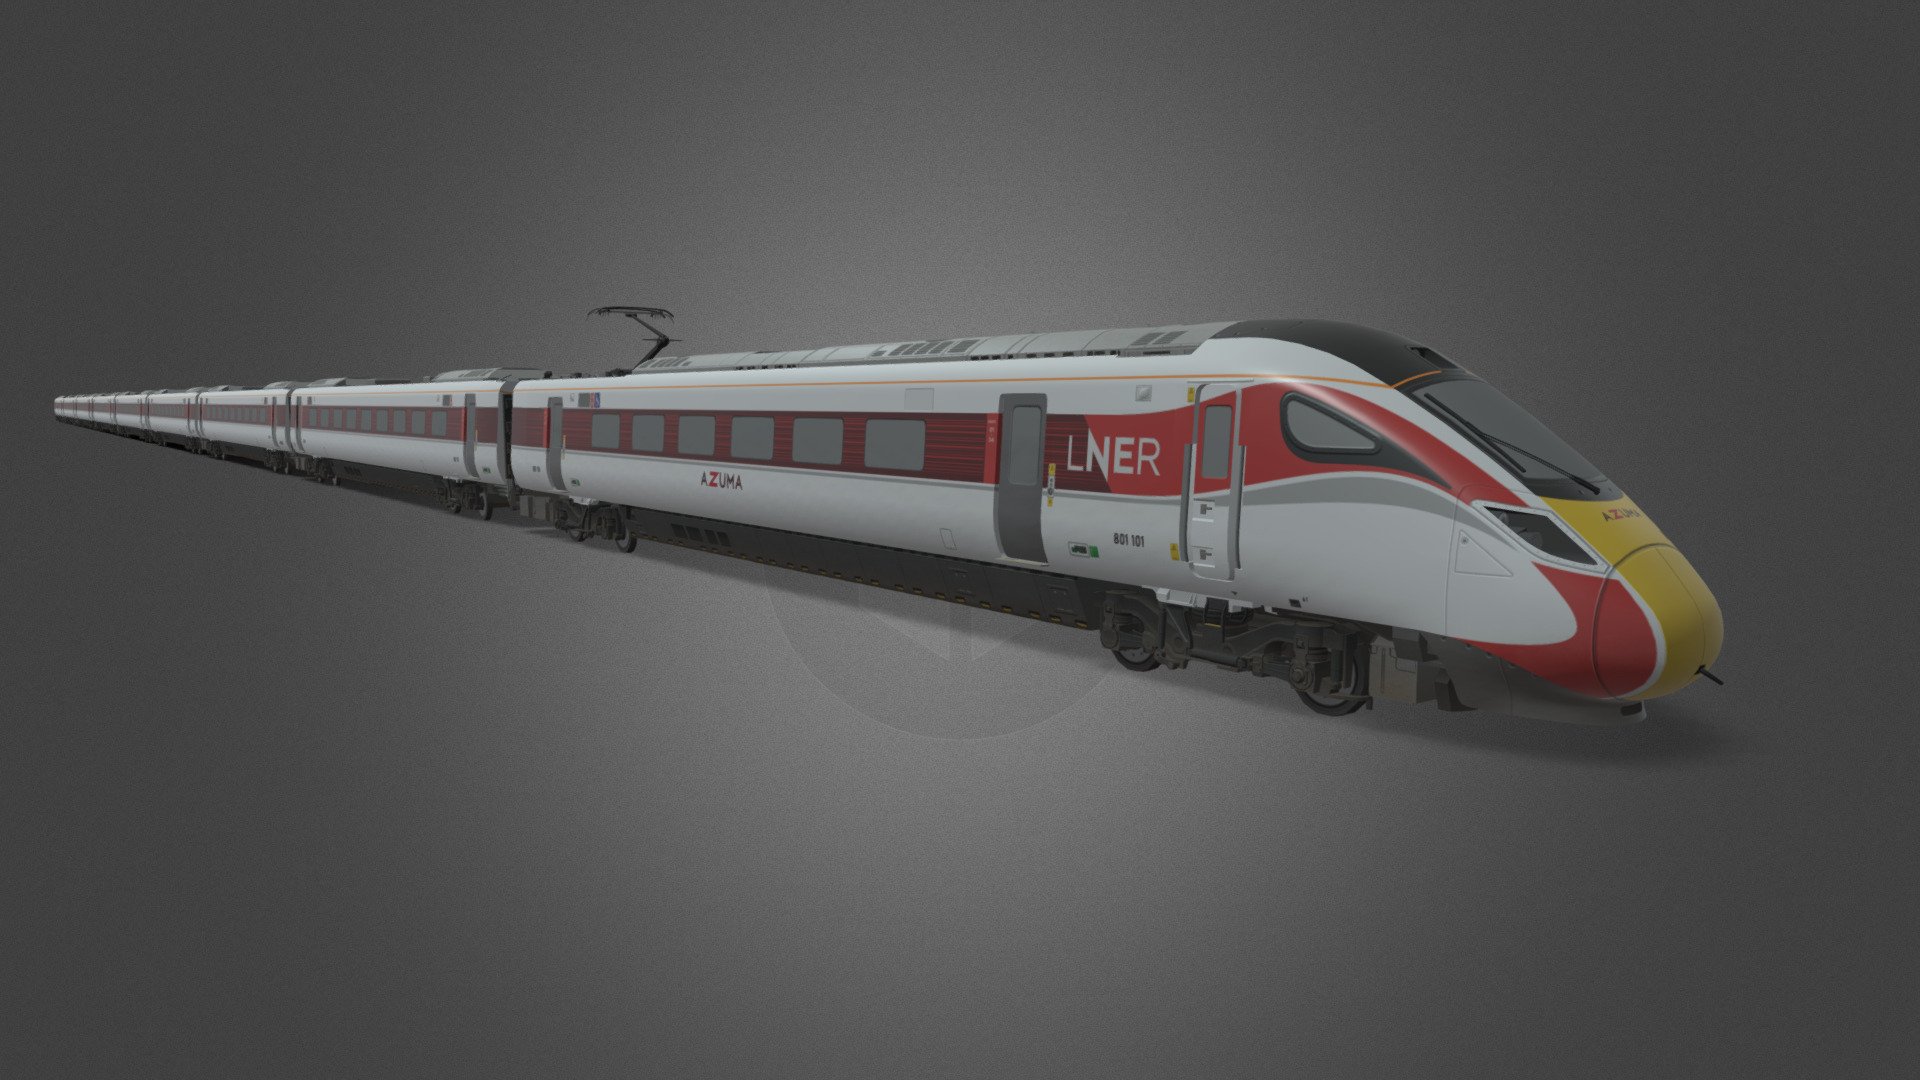 The British Rail Class 800 Intercity Express Train or Azuma is a type of bi-mode multiple unit train built by Hitachi for Great Western Railway and London North Eastern Railway. The type uses electric motors powered from overhead electric wires for traction, but also has diesel generators to enable trains to operate on unelectrified track. Based on the Hitachi A-train design, the trains were built by Hitachi between 2014 and 2018.

This model was originally made as an asset for the game Cities: Skylines. There are some minor simplifications to the texture and model to keep it optimised for the game.

This model includes a 9-car variant of the Class 800, with 8 unique trailer models

Available formats: Wavefront OBJ (.obj), Autodesk FBX (.fbx), STL (.stl)

Polygon count: 58,048 Vertex count: 95,936

Model made in Blender 3.0 - British Rail Class 800 - LNER Livery - Buy Royalty Free 3D model by Nostrix 3d model